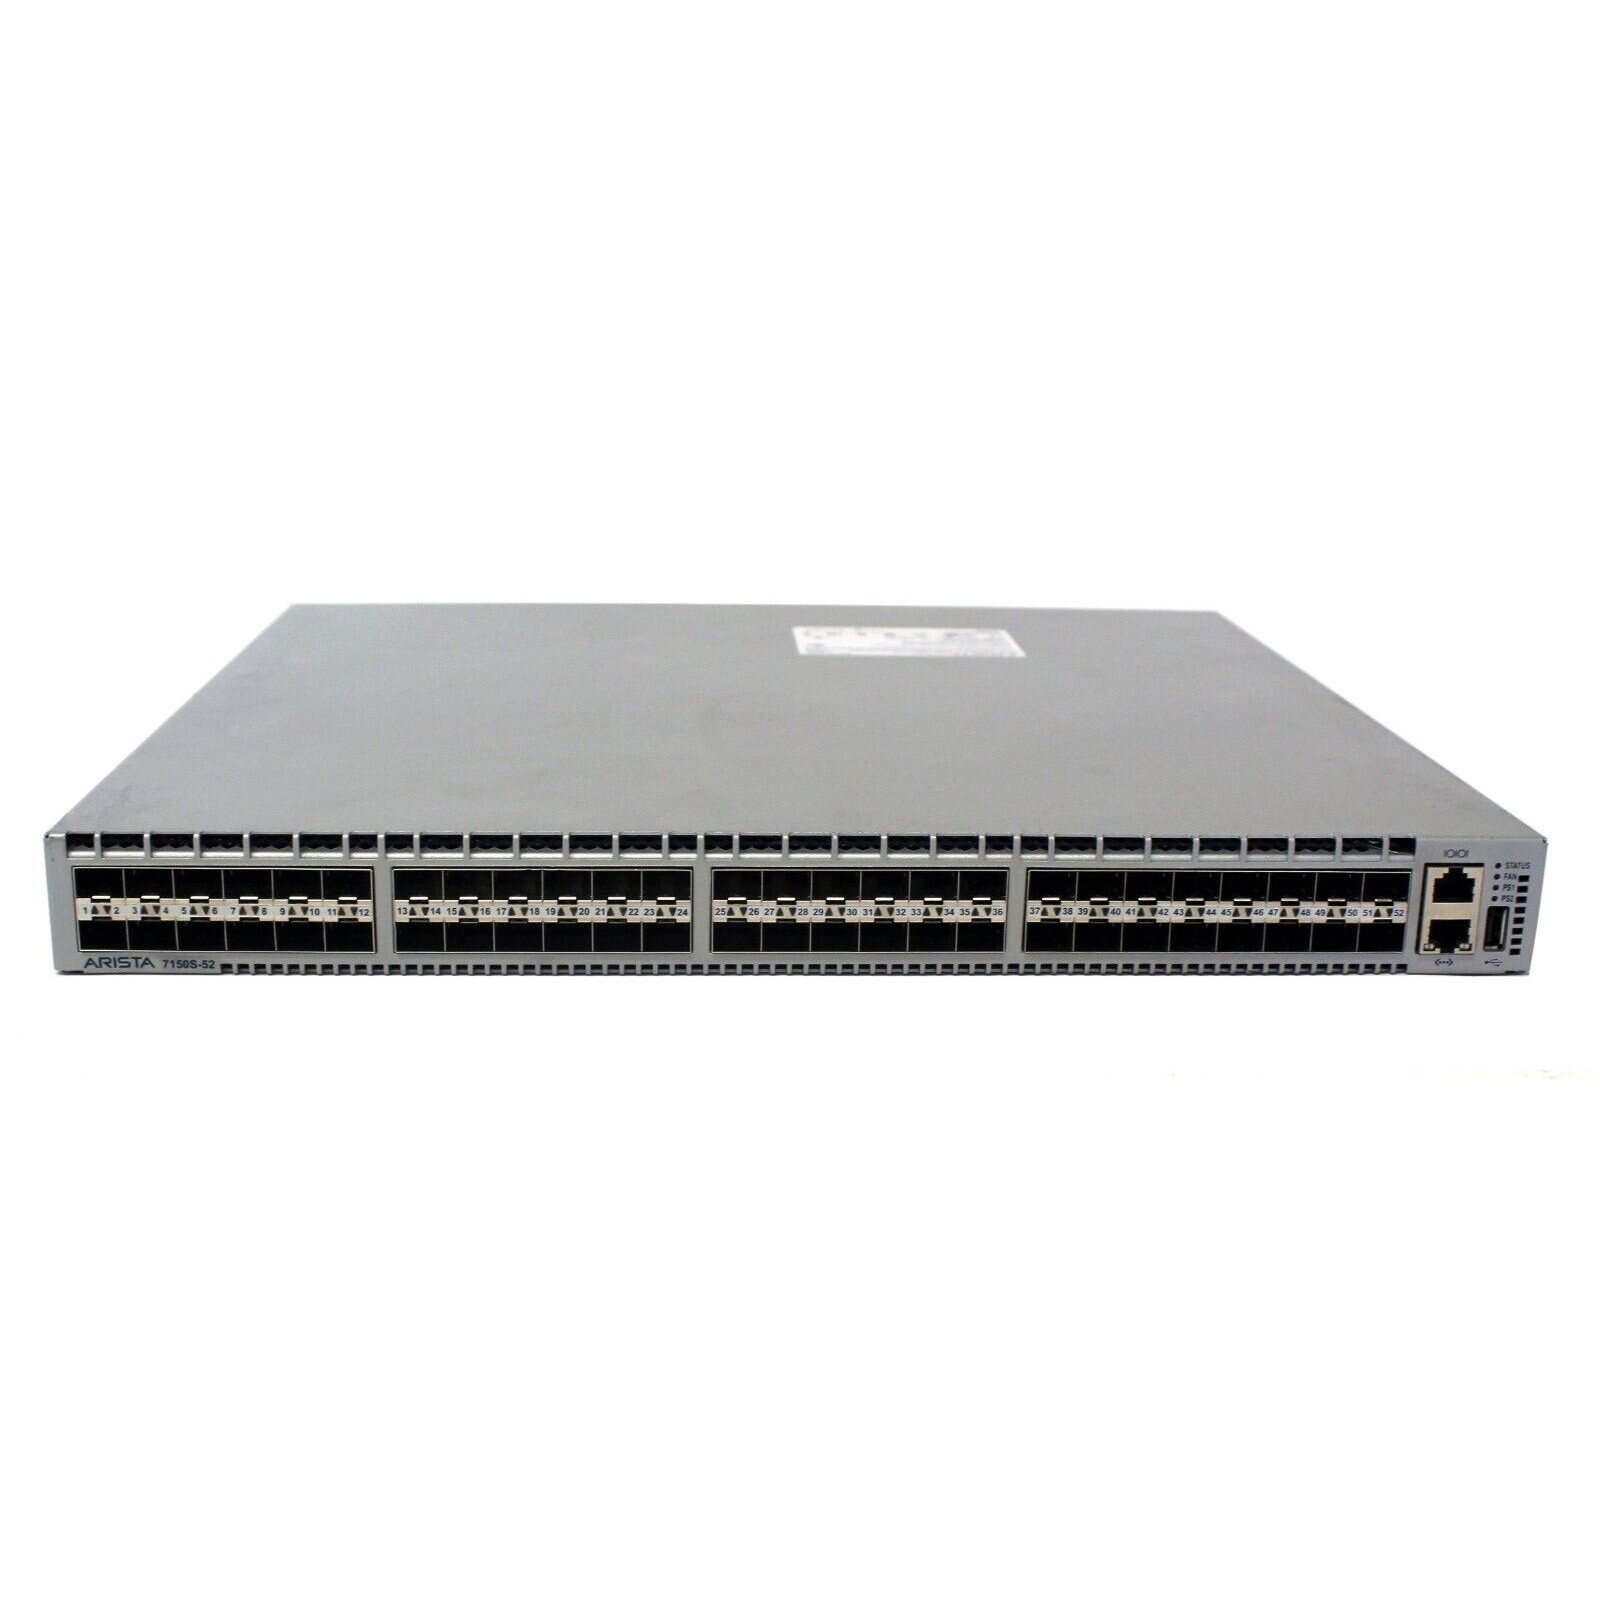 Arista DCS-7150S-52-CL-R 52xSFP+ 10G Managed Switch